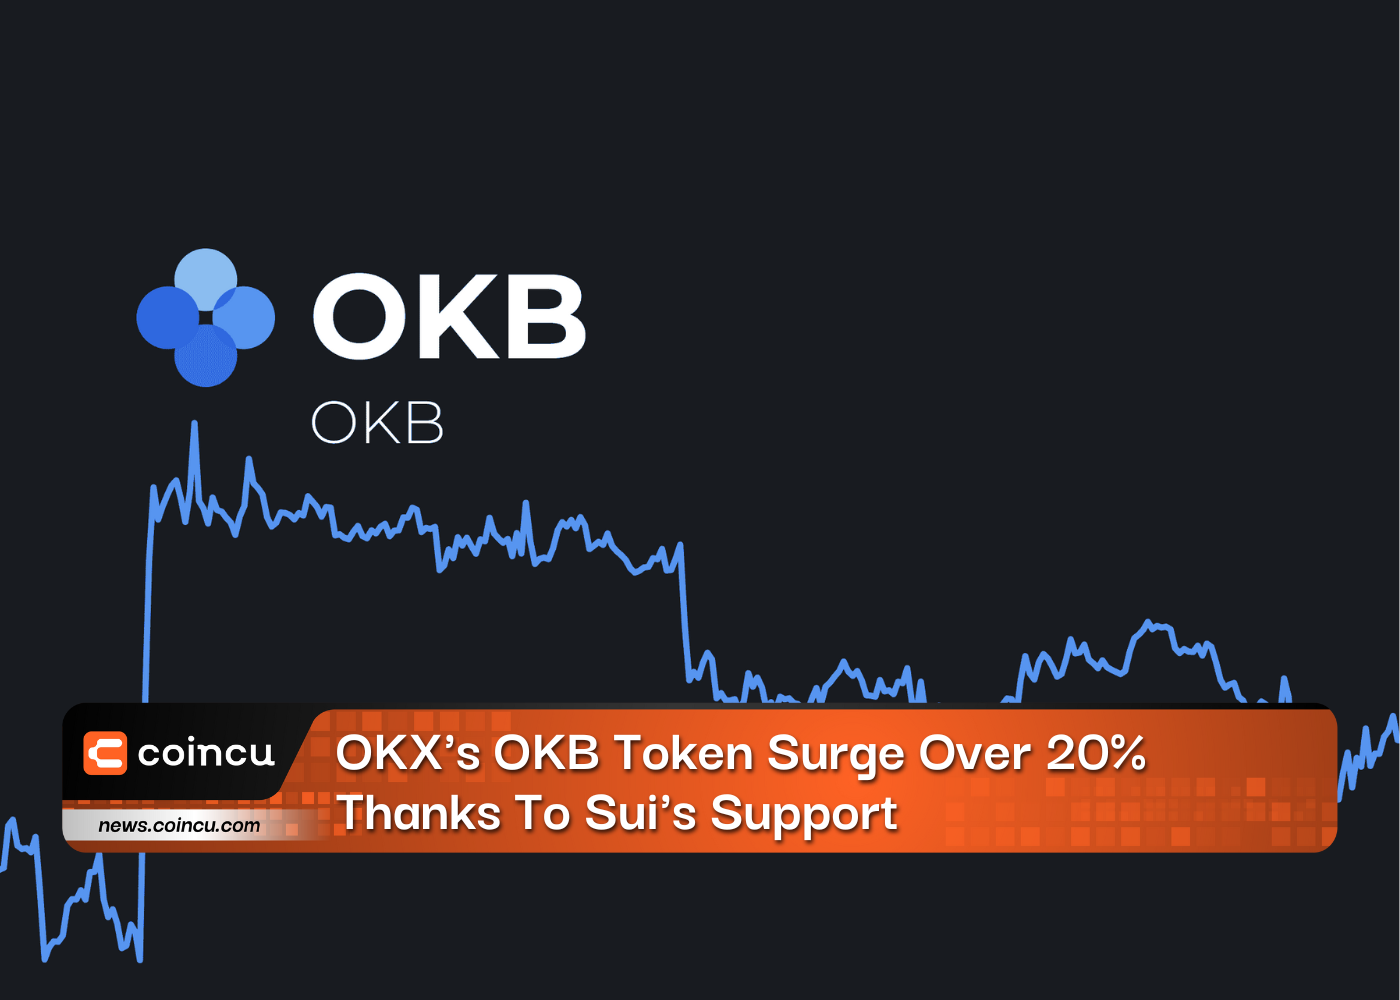 OKX's OKB Token Surge Over 20% Thanks To Sui's Support